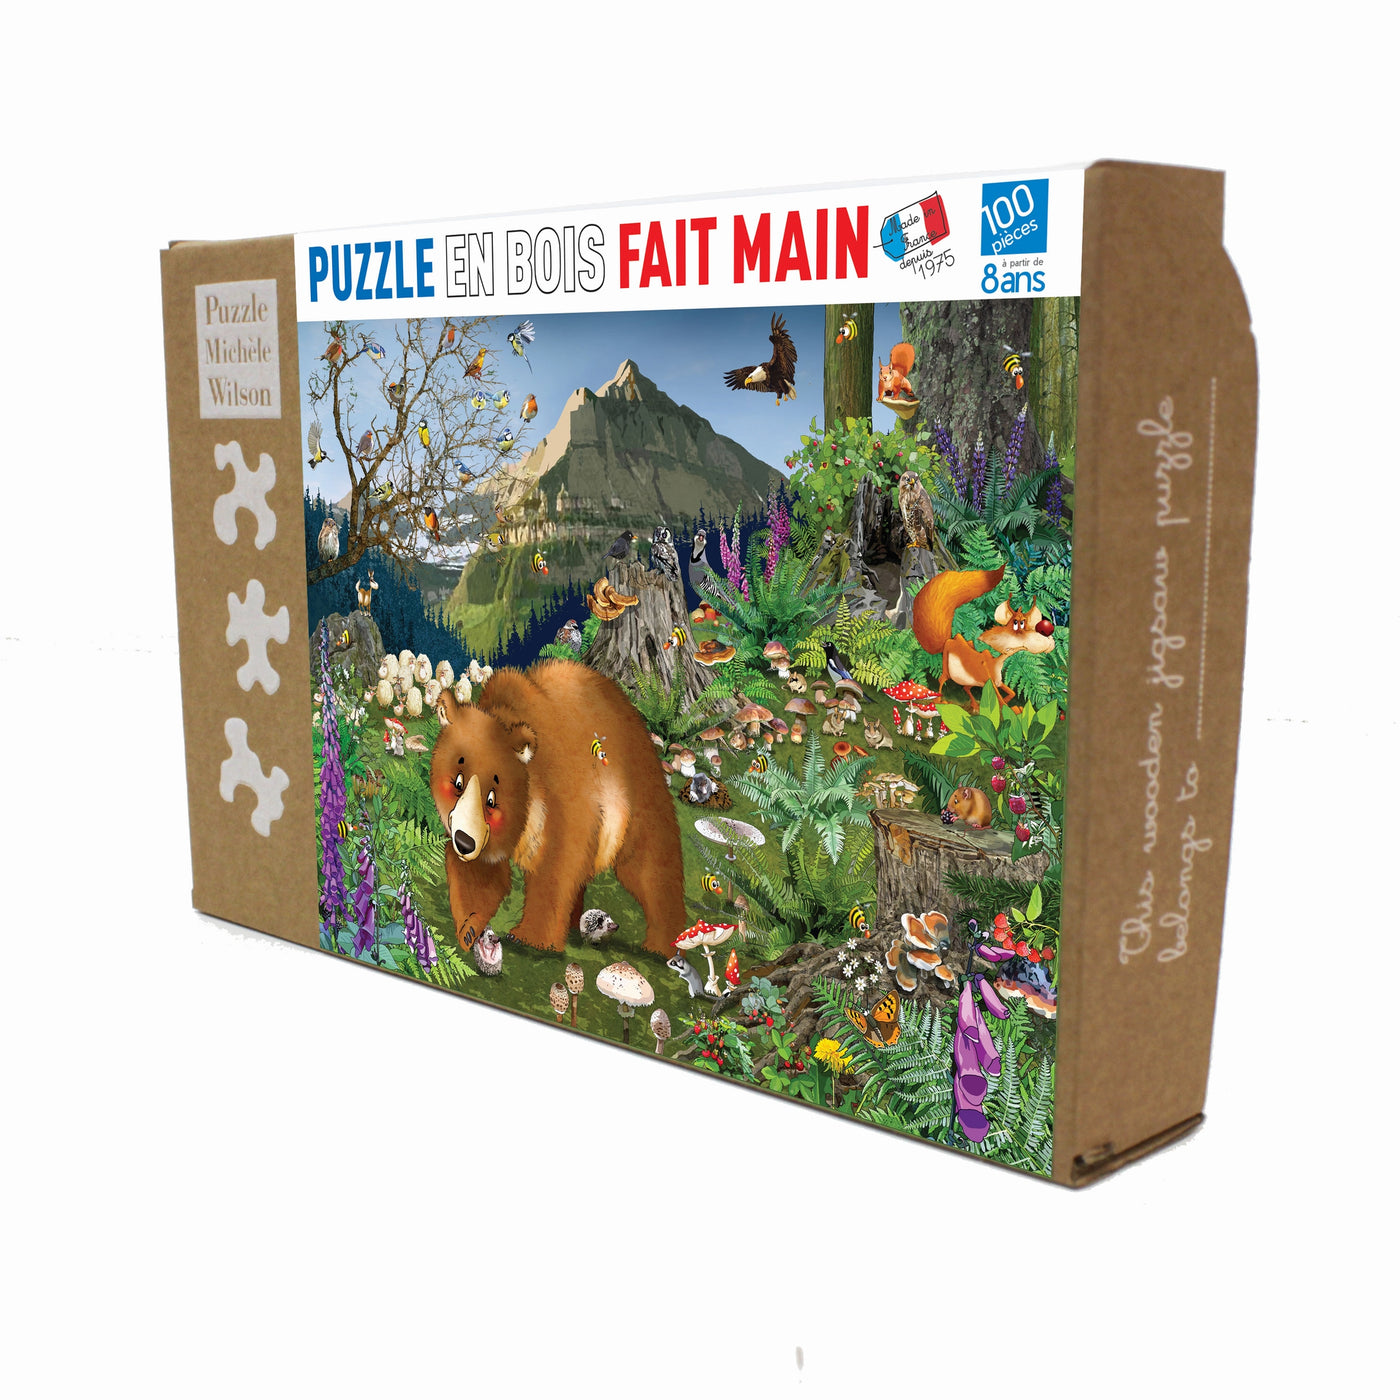 In the Mountains, Wooden Jigsaw Puzzle